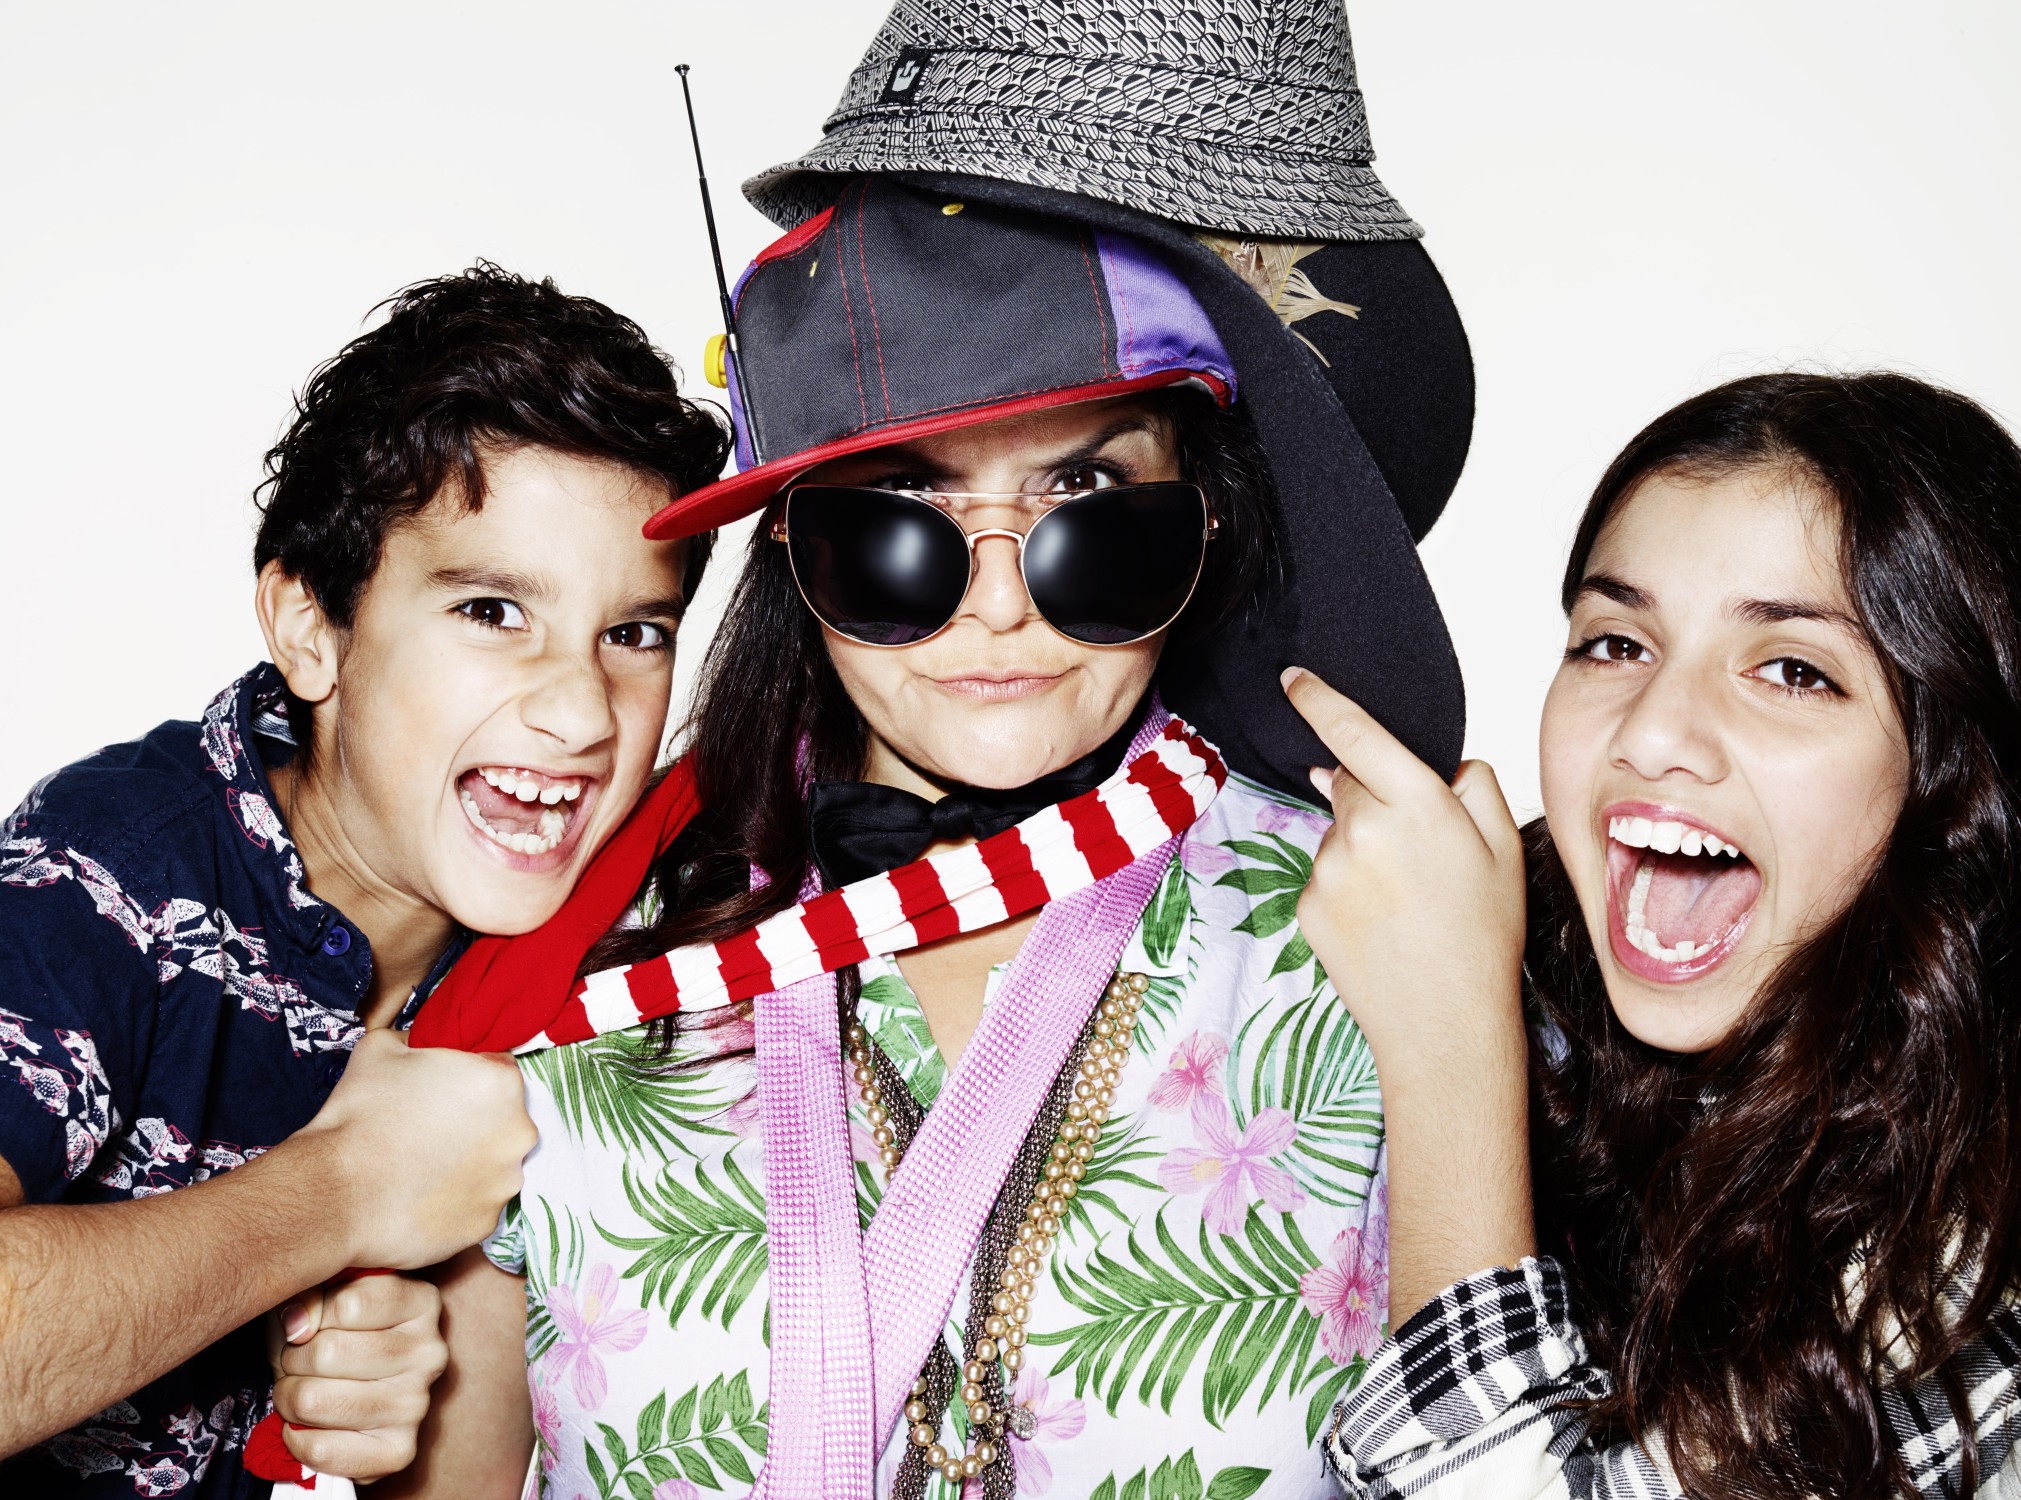 Eastenders star Nina Wadia and her two children, daughter Tia aged 12, and son Aidan, aged 9